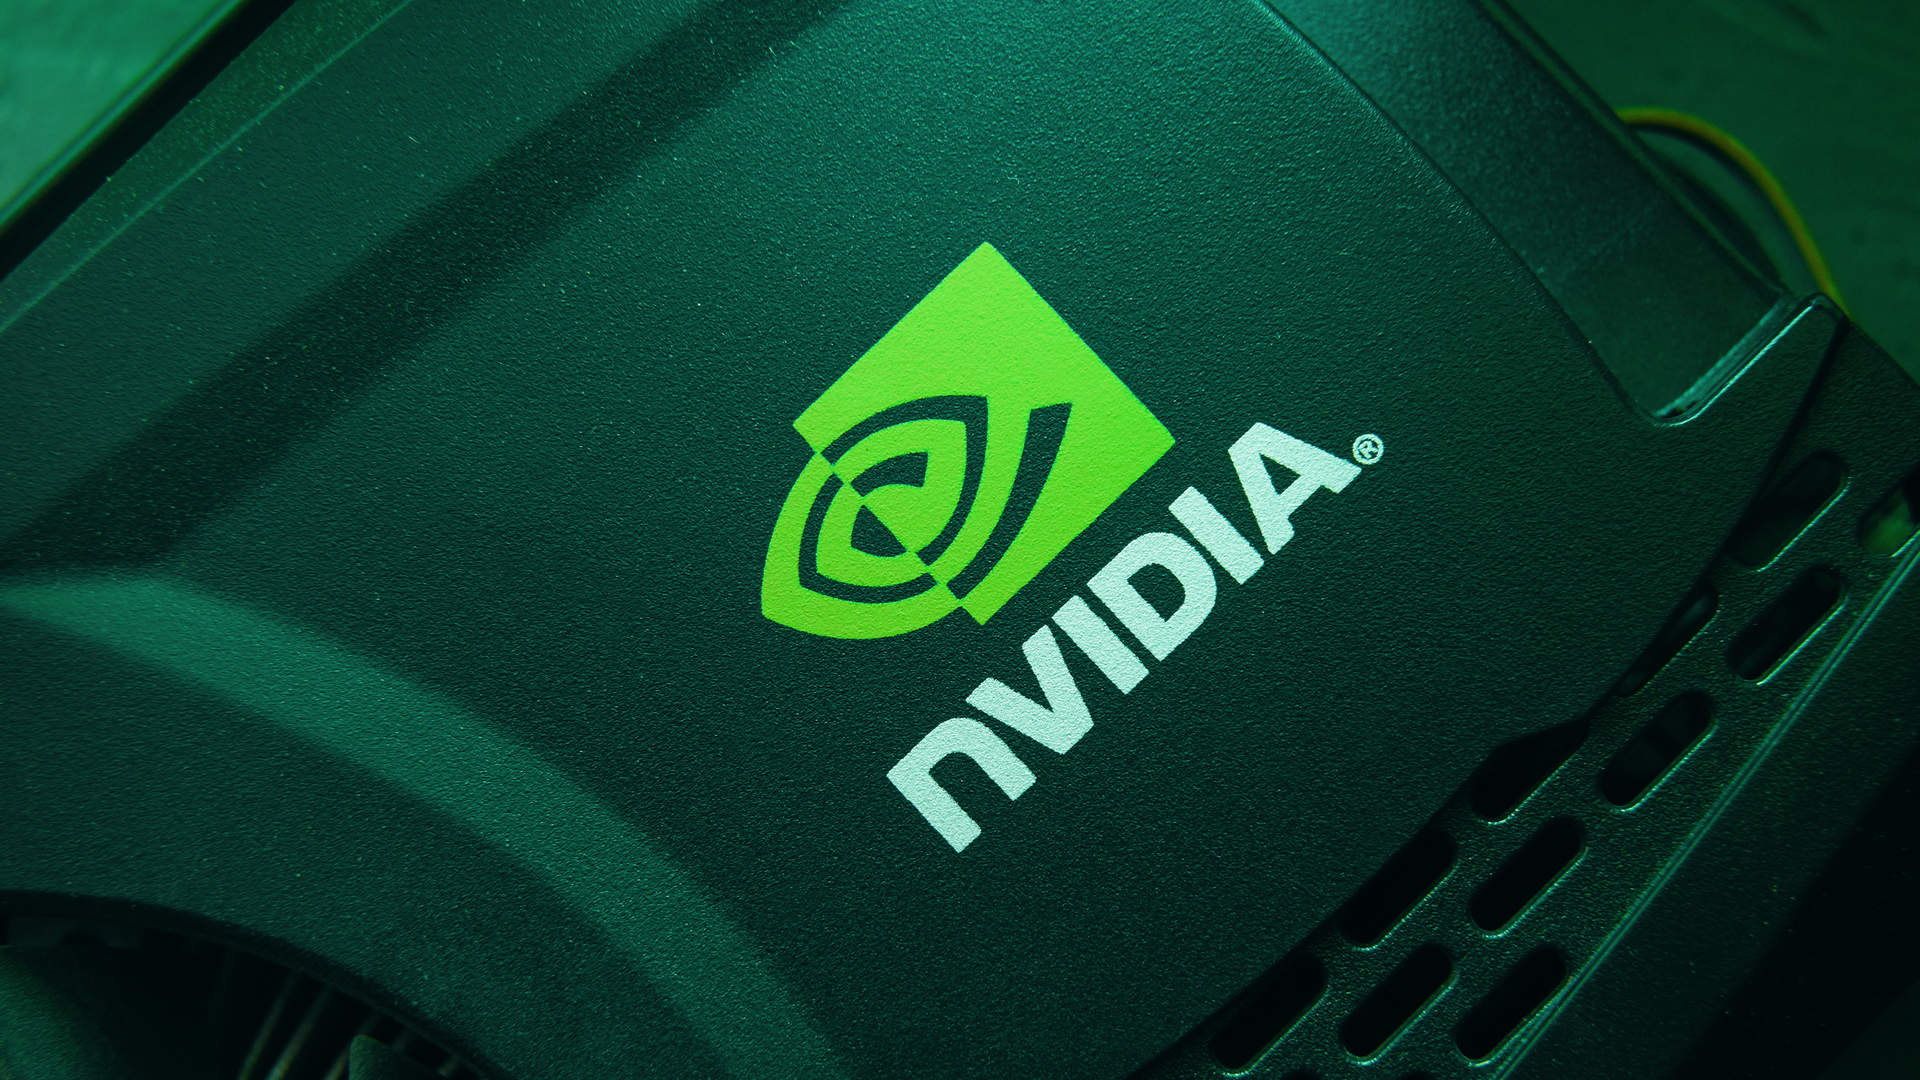 Nvidia Rtx 3080 Ti Gpu Spotted In A Leaked Gaming Laptop Benchmark